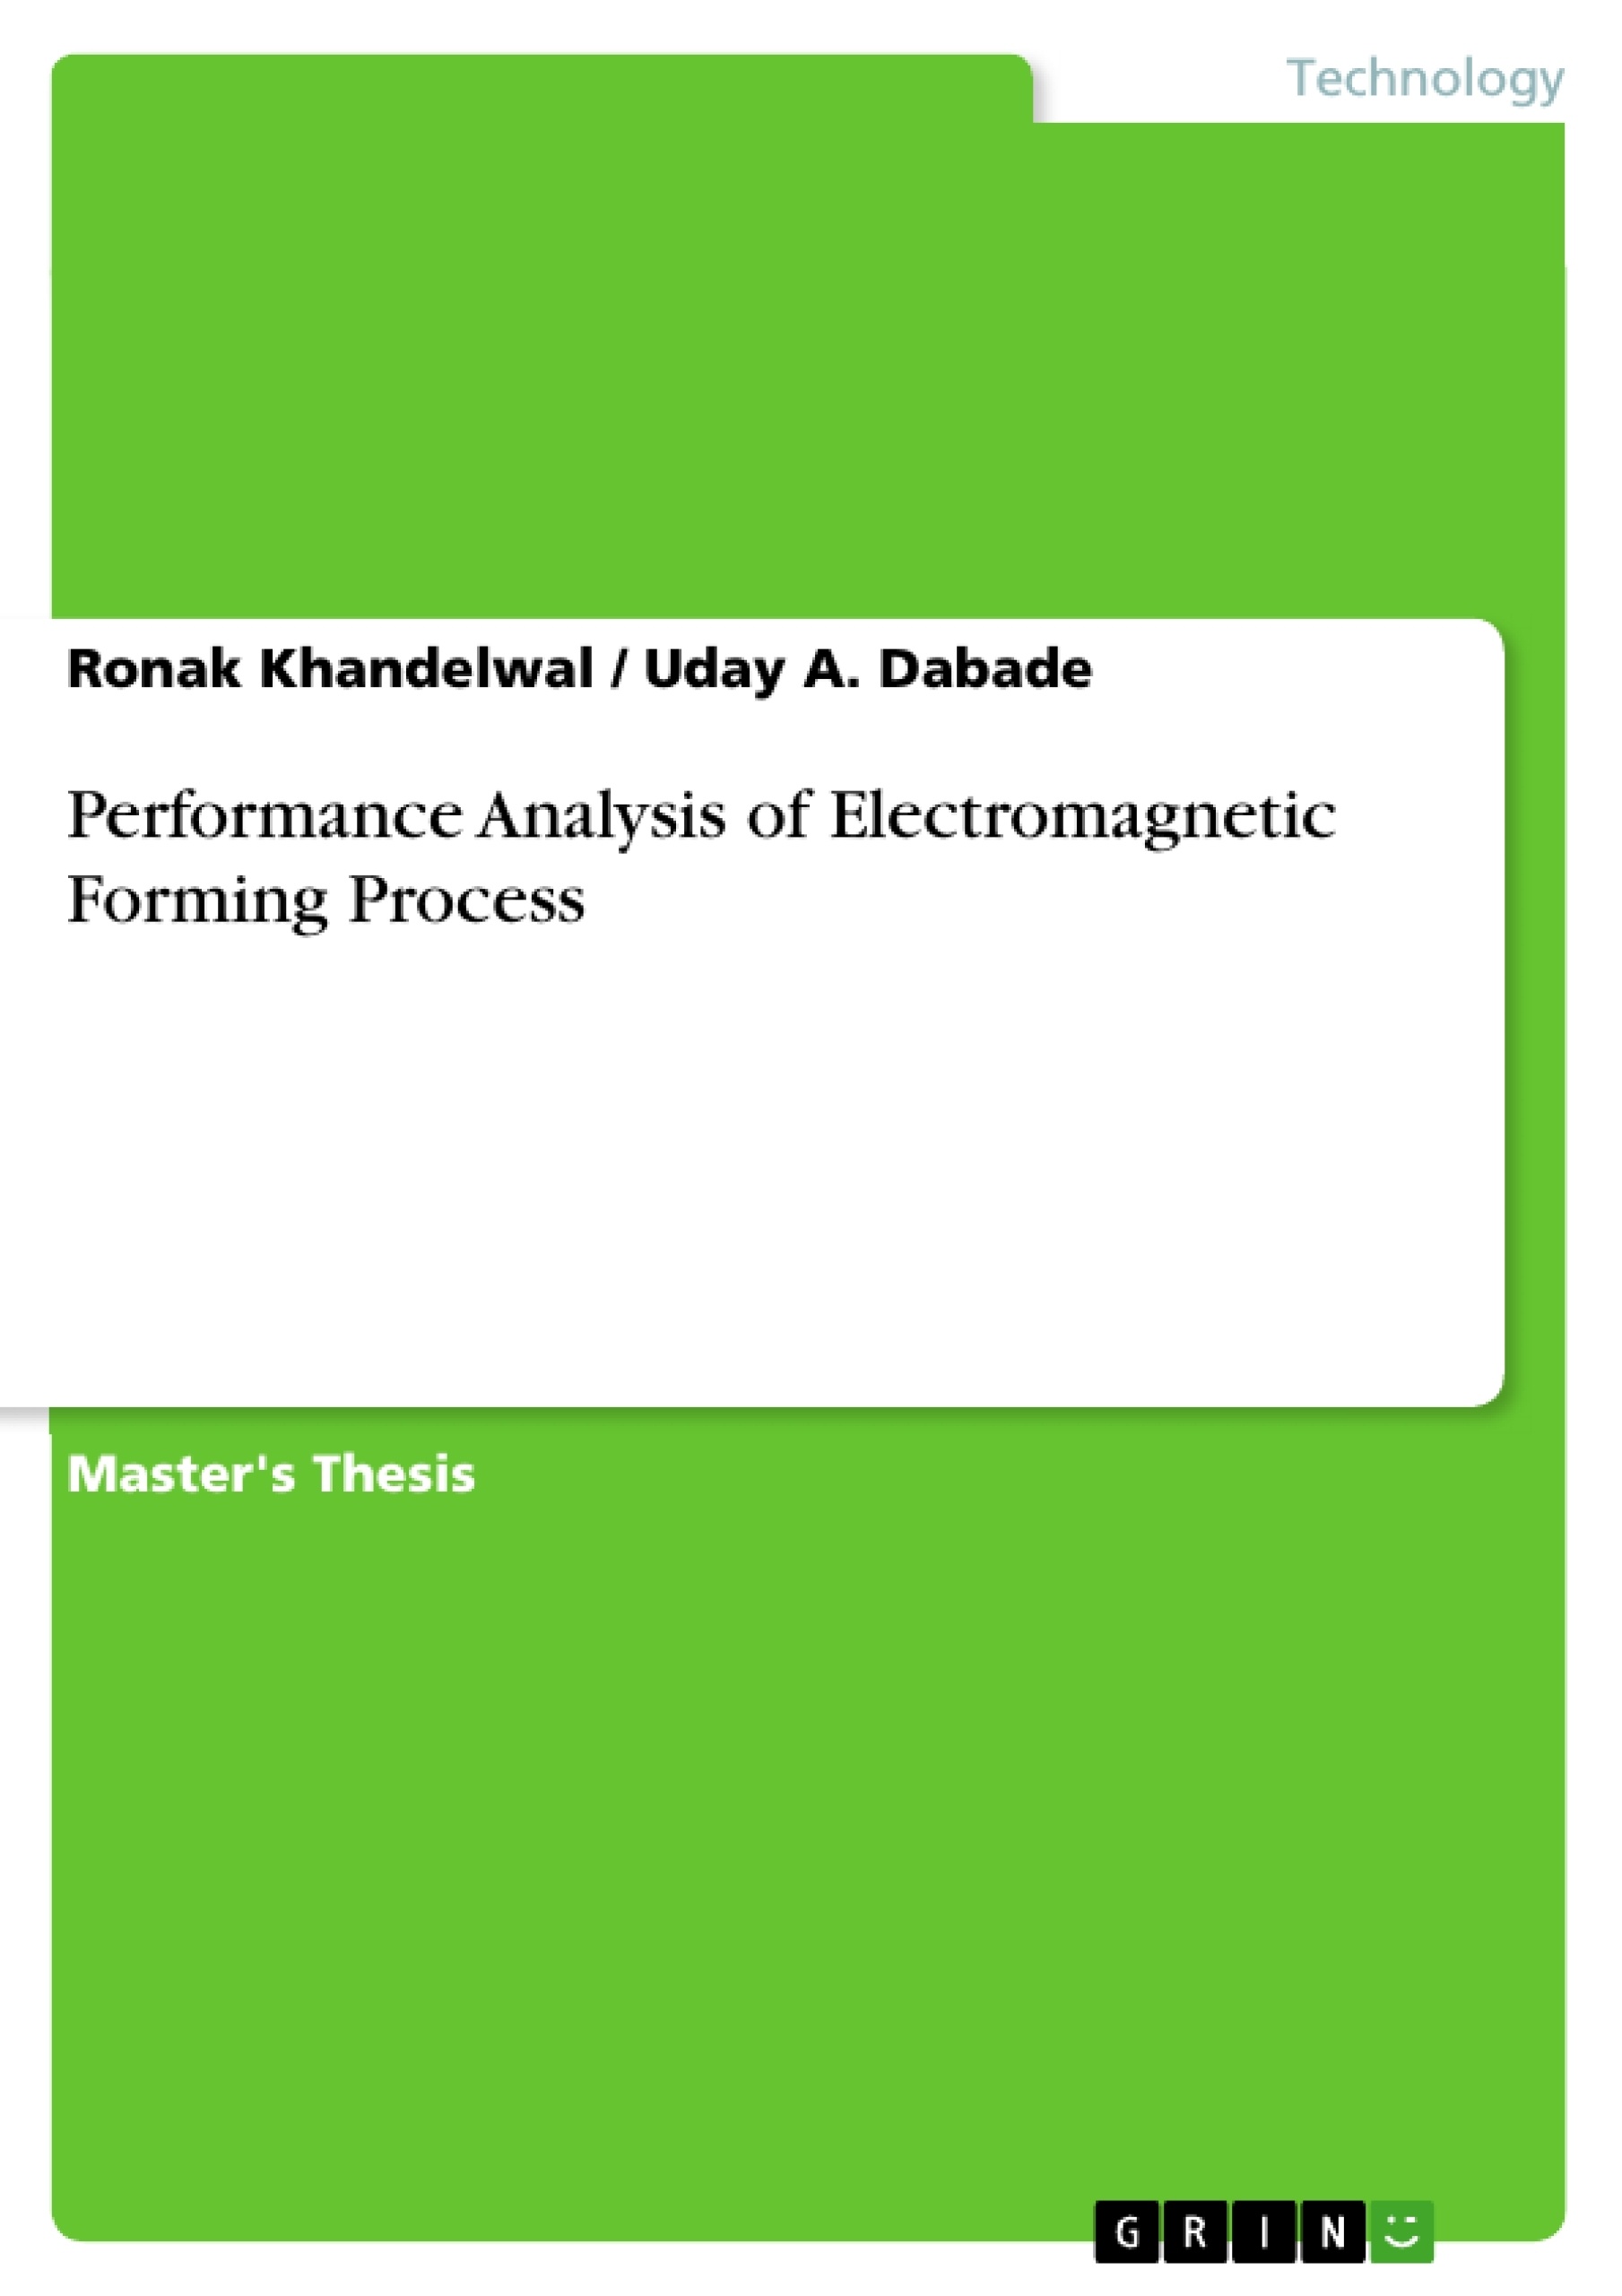 Title: Performance Analysis of Electromagnetic Forming Process